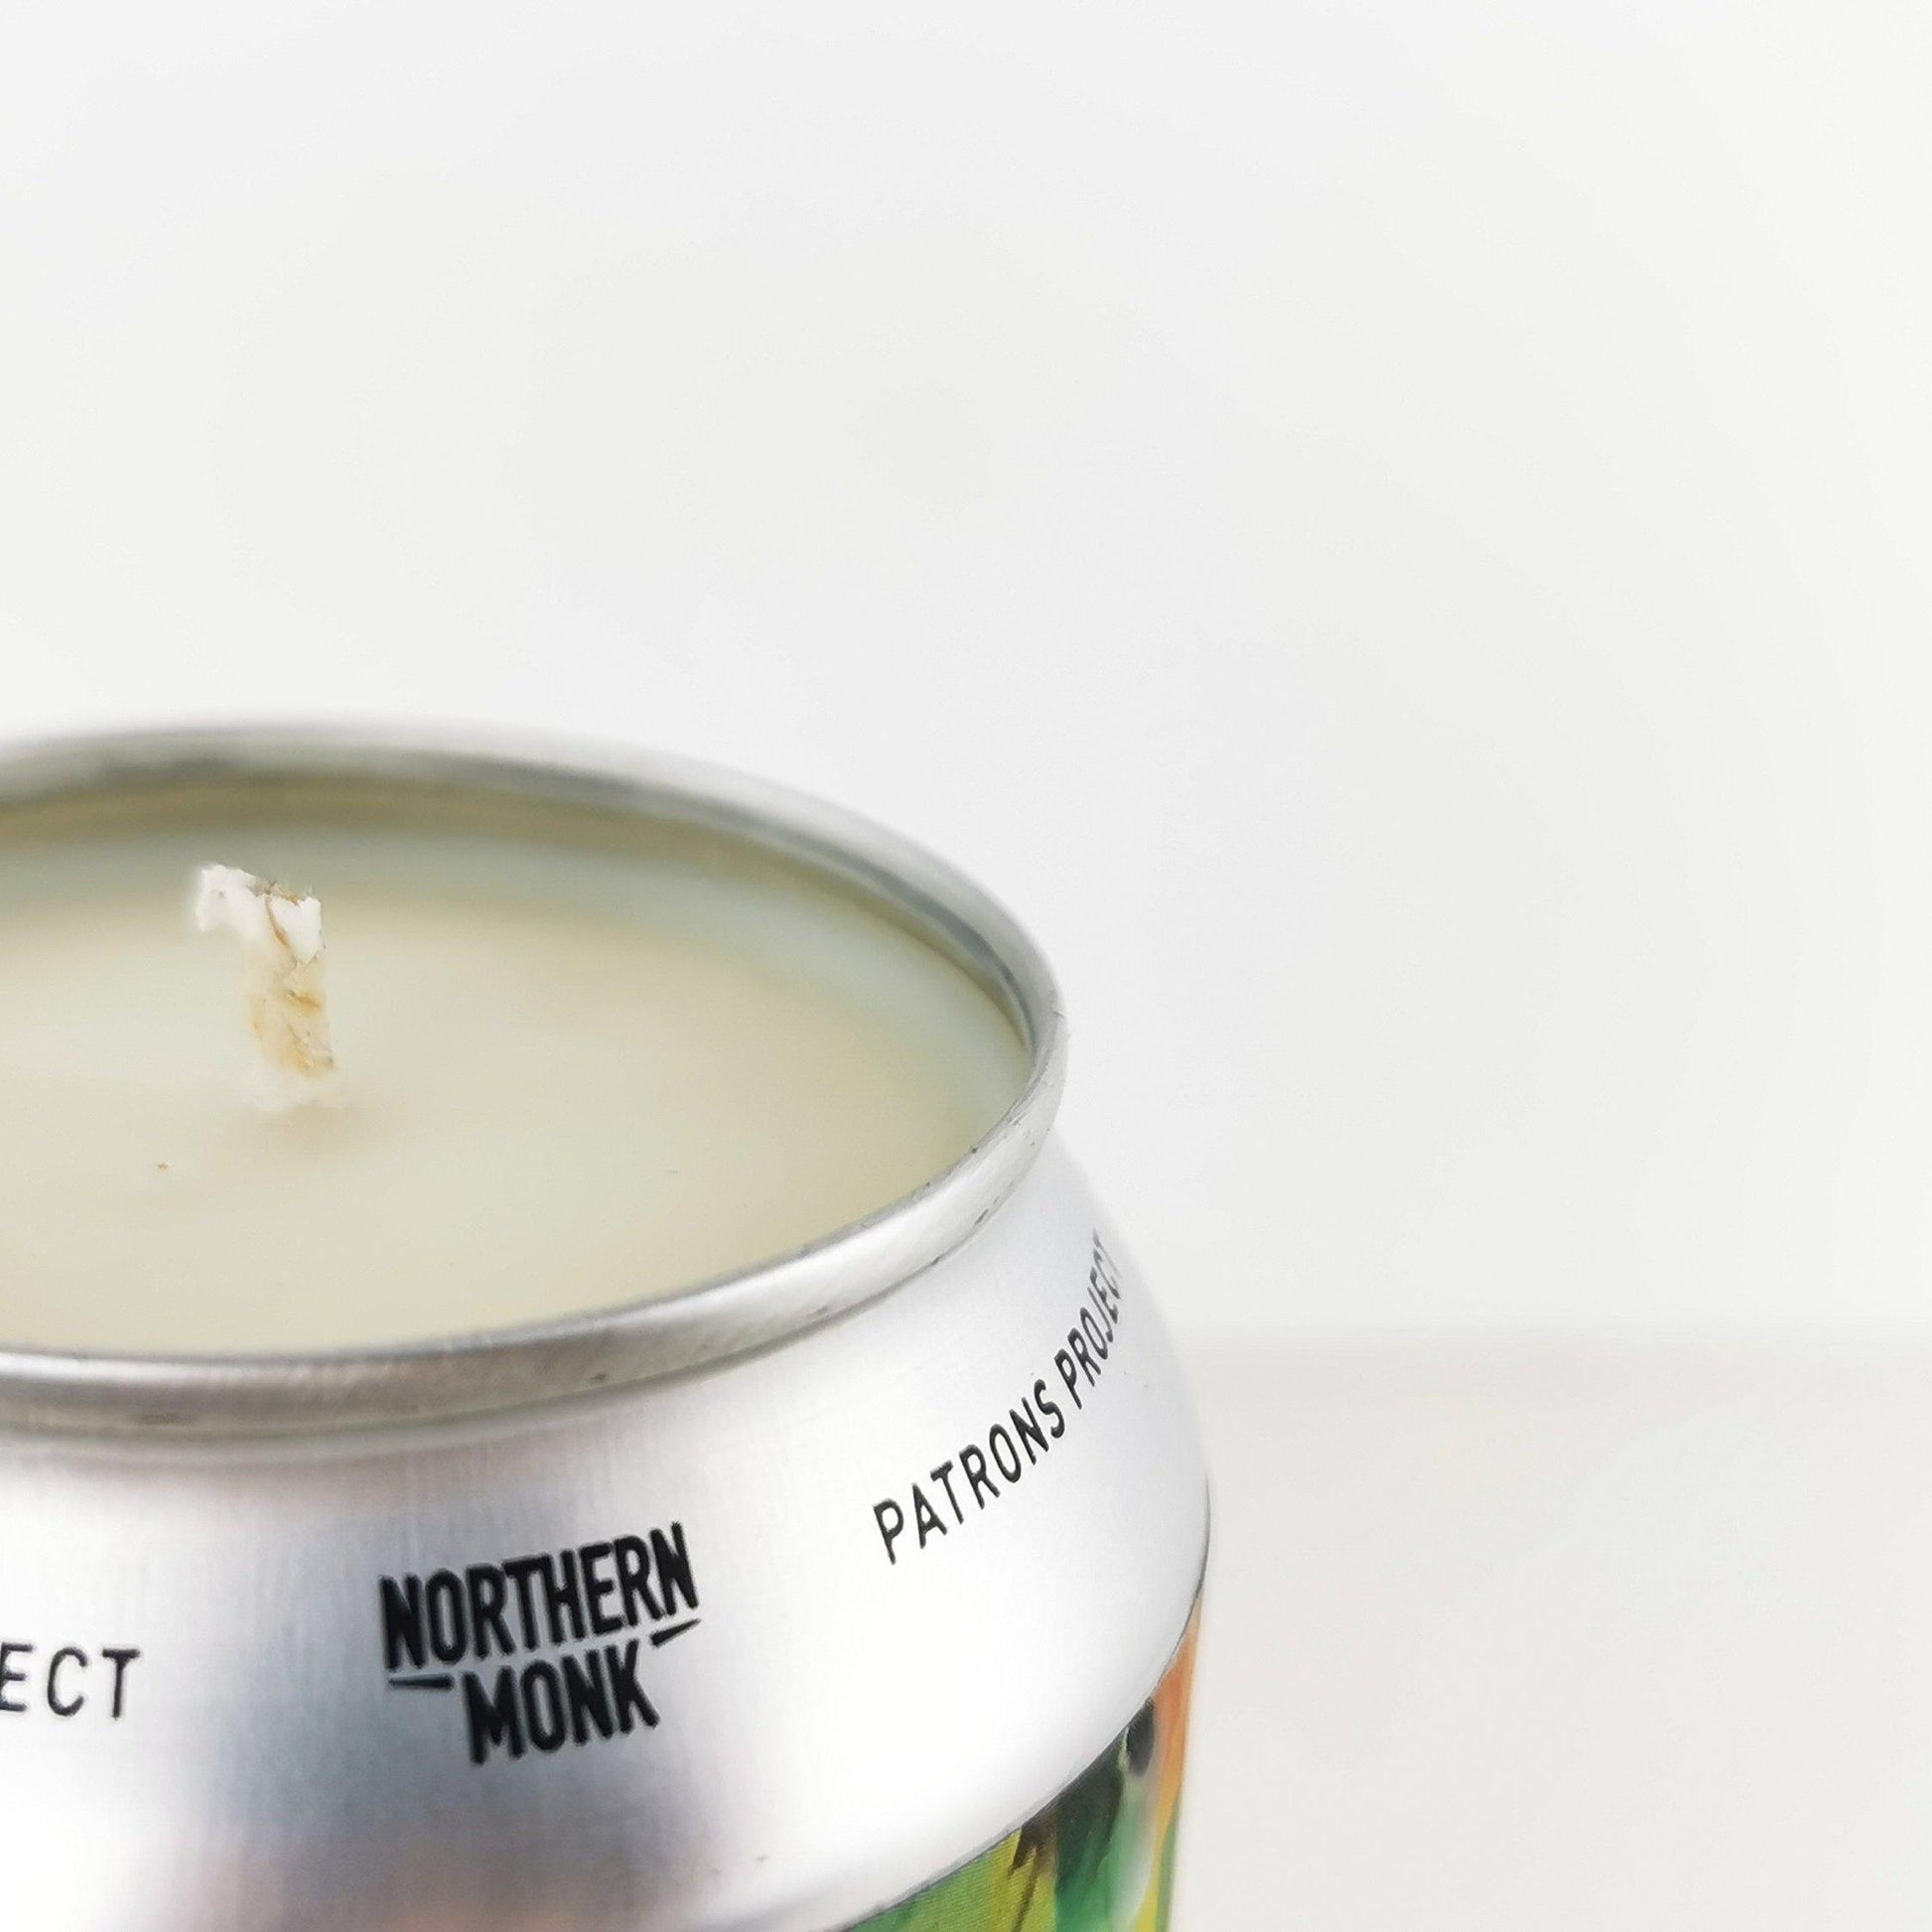 Northern Monk Shepherds Warning Craft Beer Can Candle Beer Can Candles Adhock Homeware